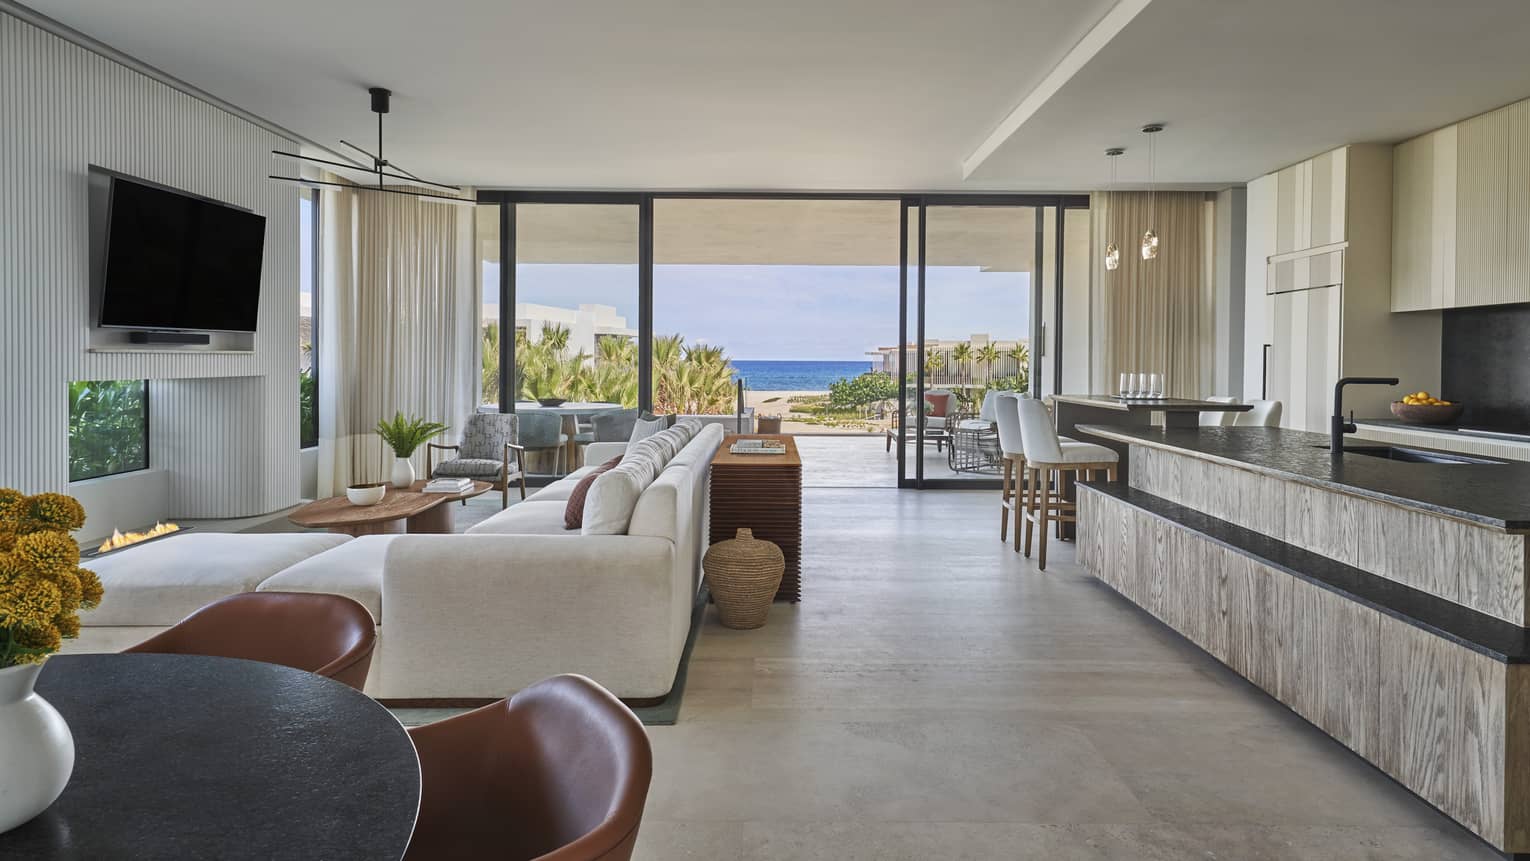 Contemporary, open-concept living room and kitchen area with ocean view